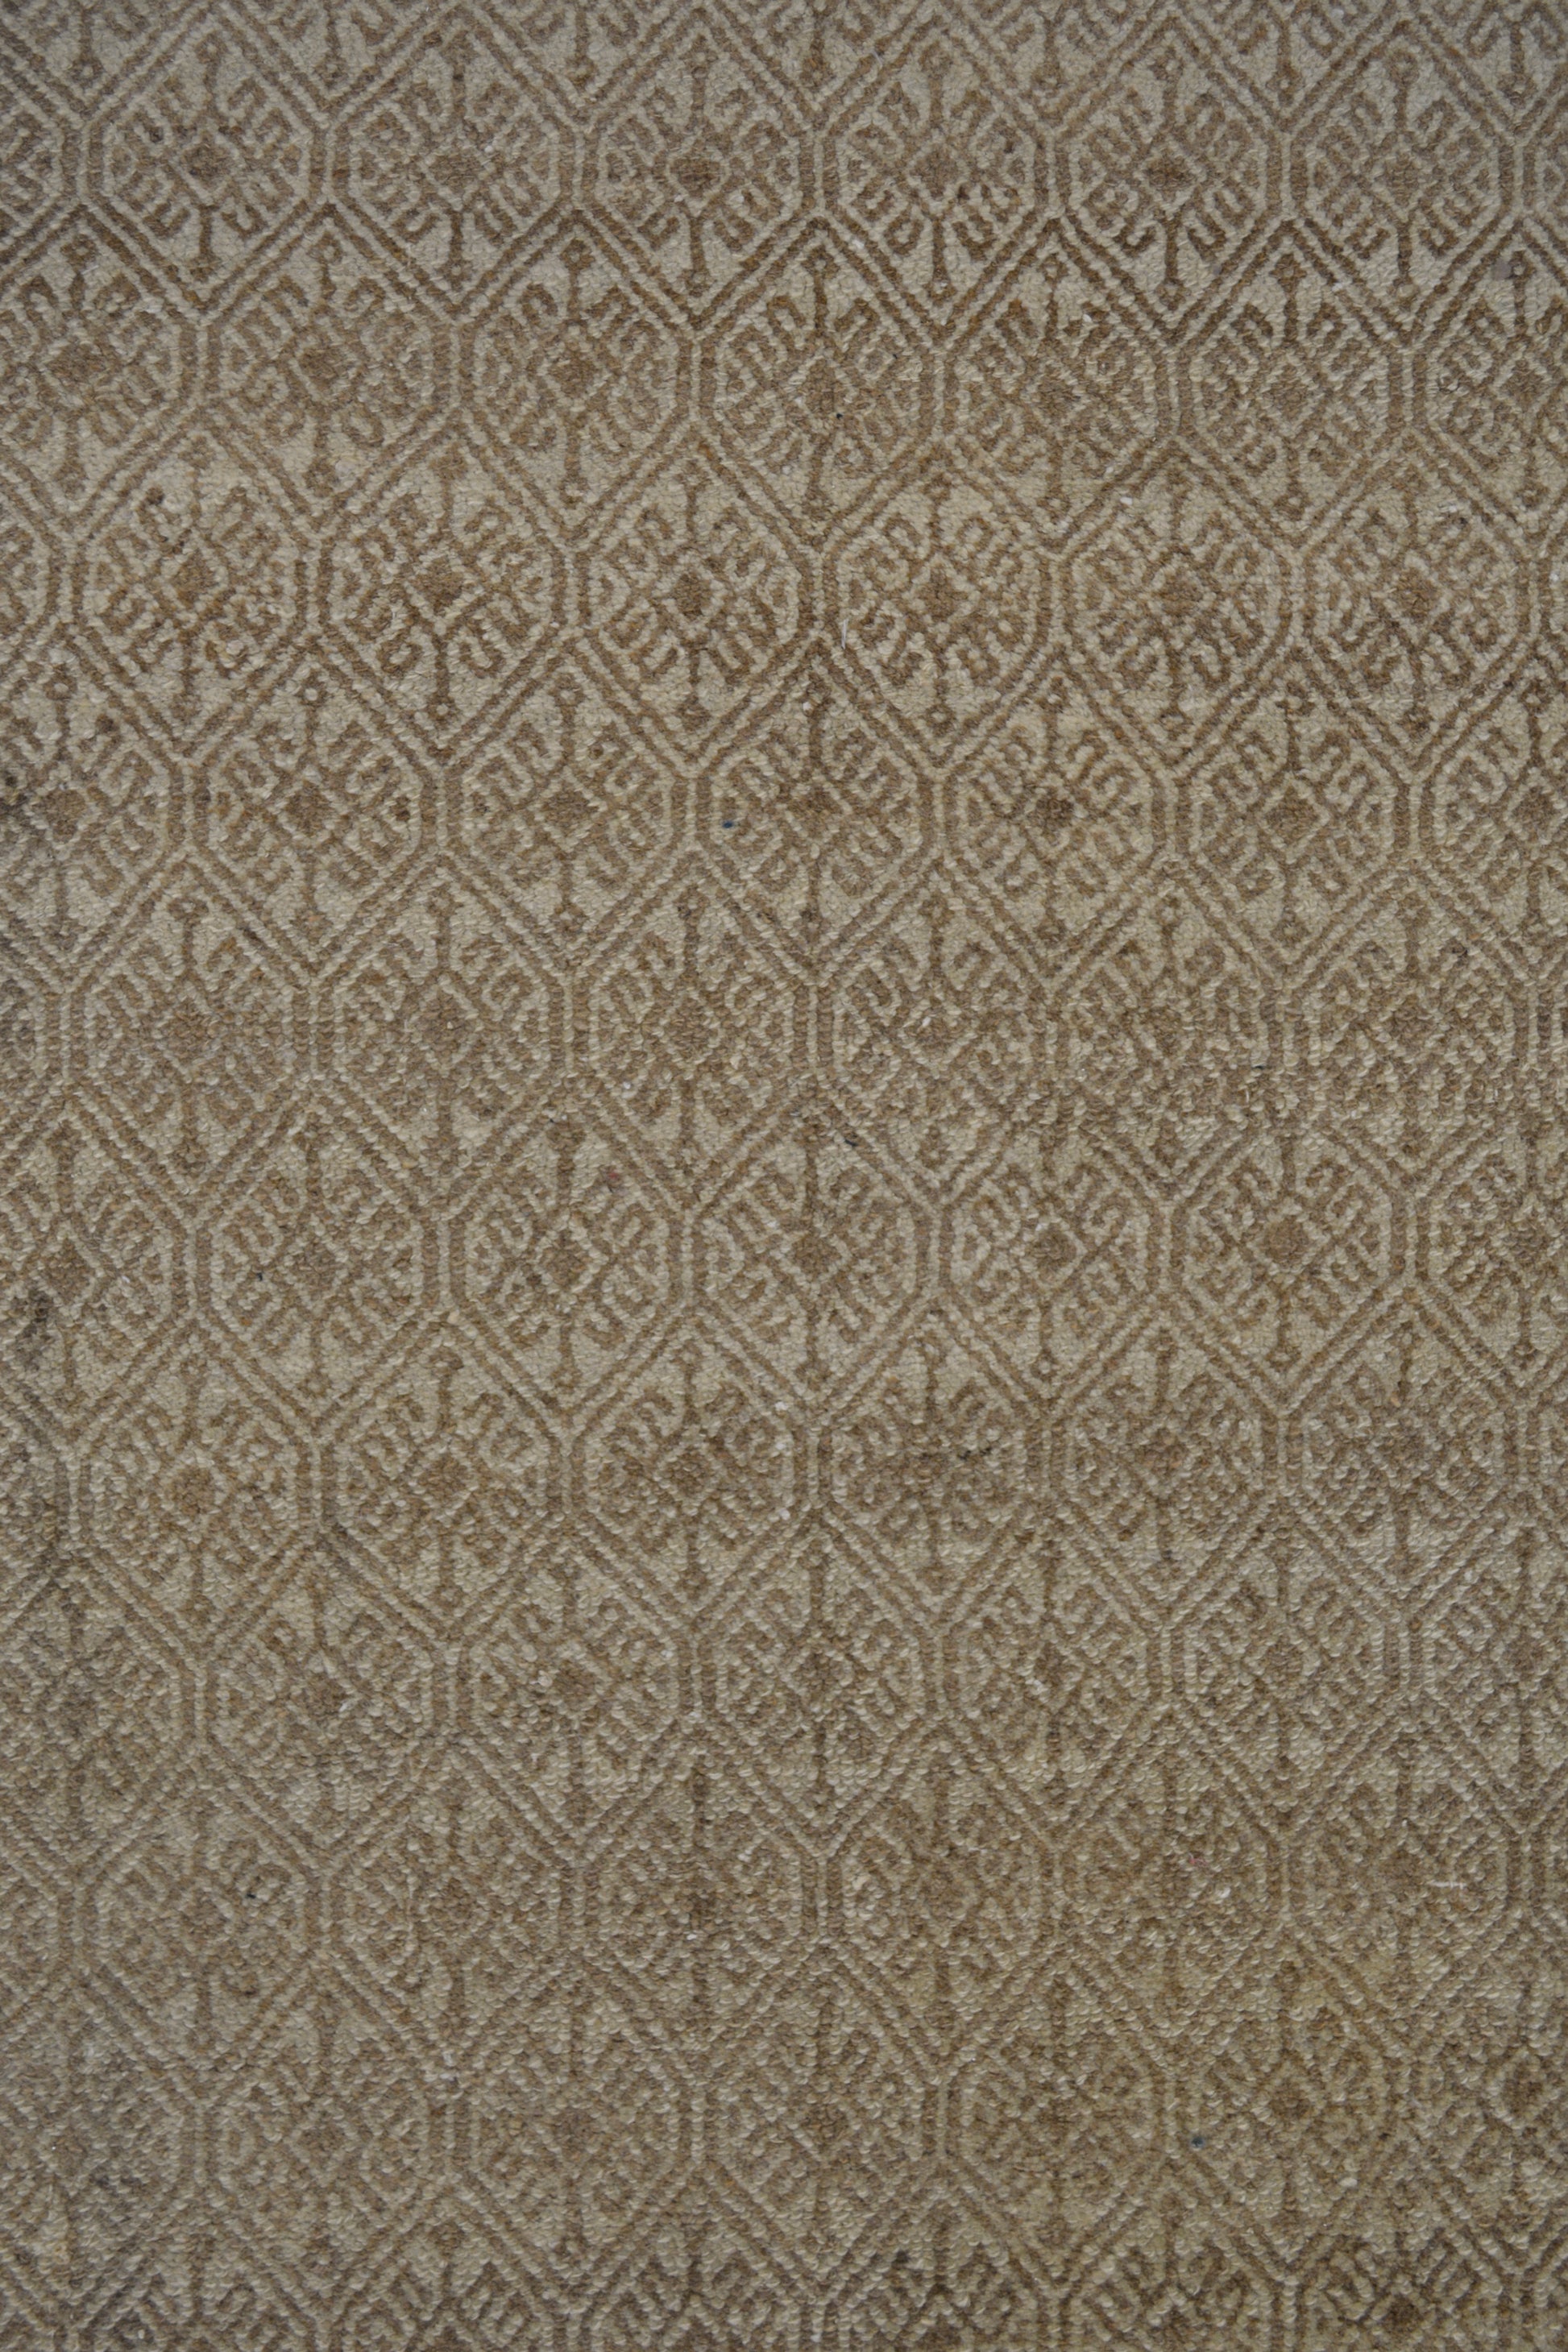 The close up for the center of the rug shows a discrete brown pattern all spread out.